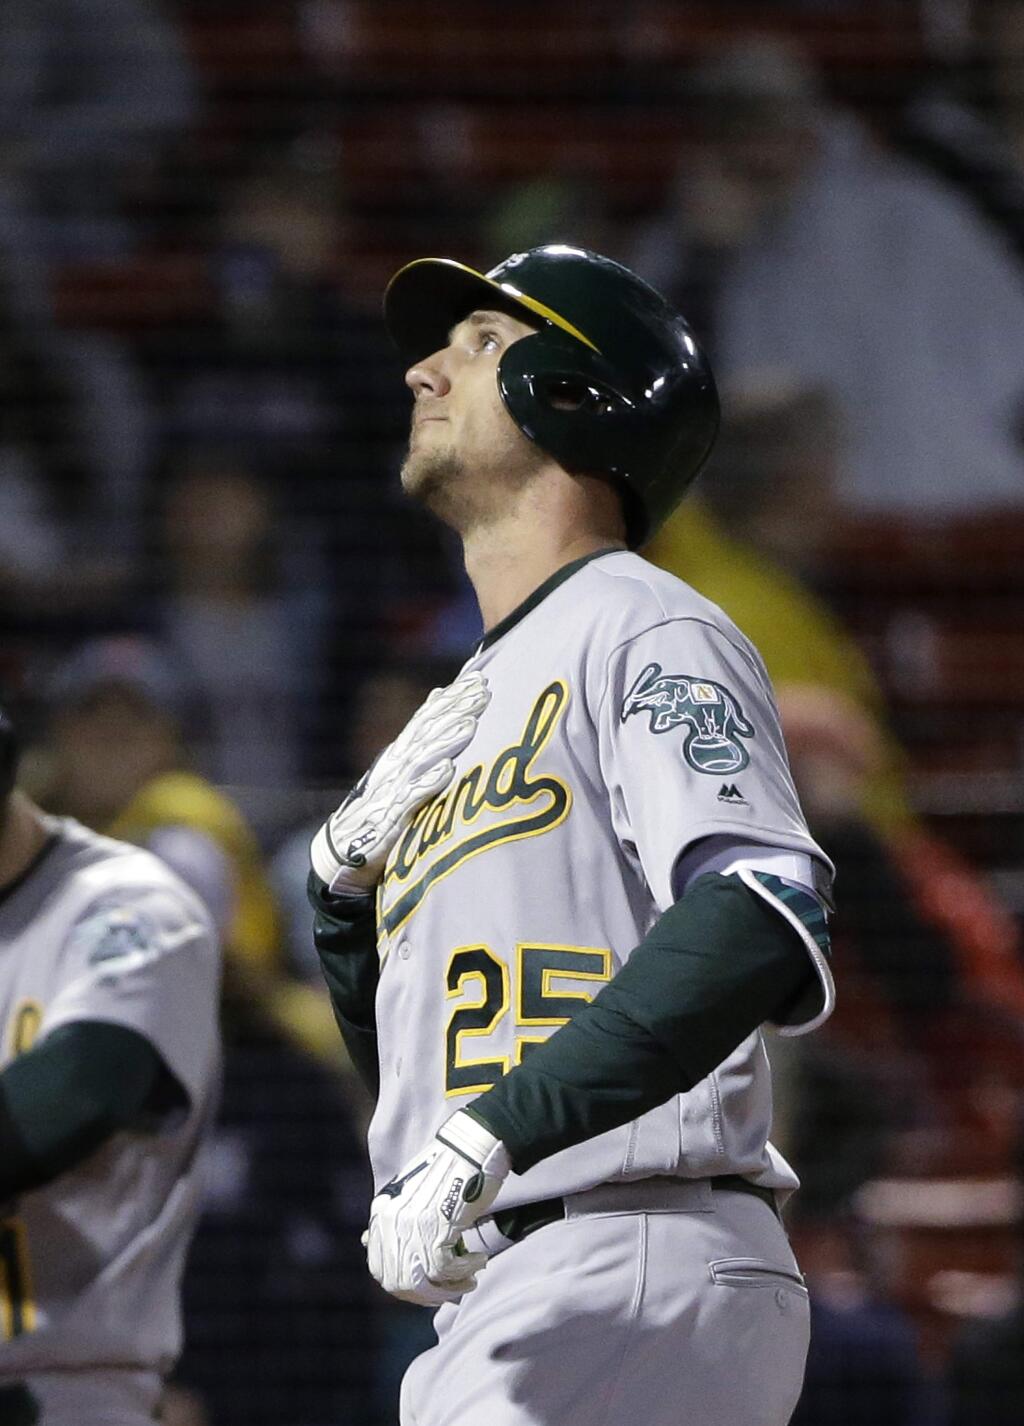 The Oakland Athletics' Stephen Piscotty looks up as he arrives at home plate after hitting a home run off Boston Red Sox's Eduardo Rodriguez during the second inning Tuesday, May 15, 2018, in Boston. (AP Photo/Steven Senne)